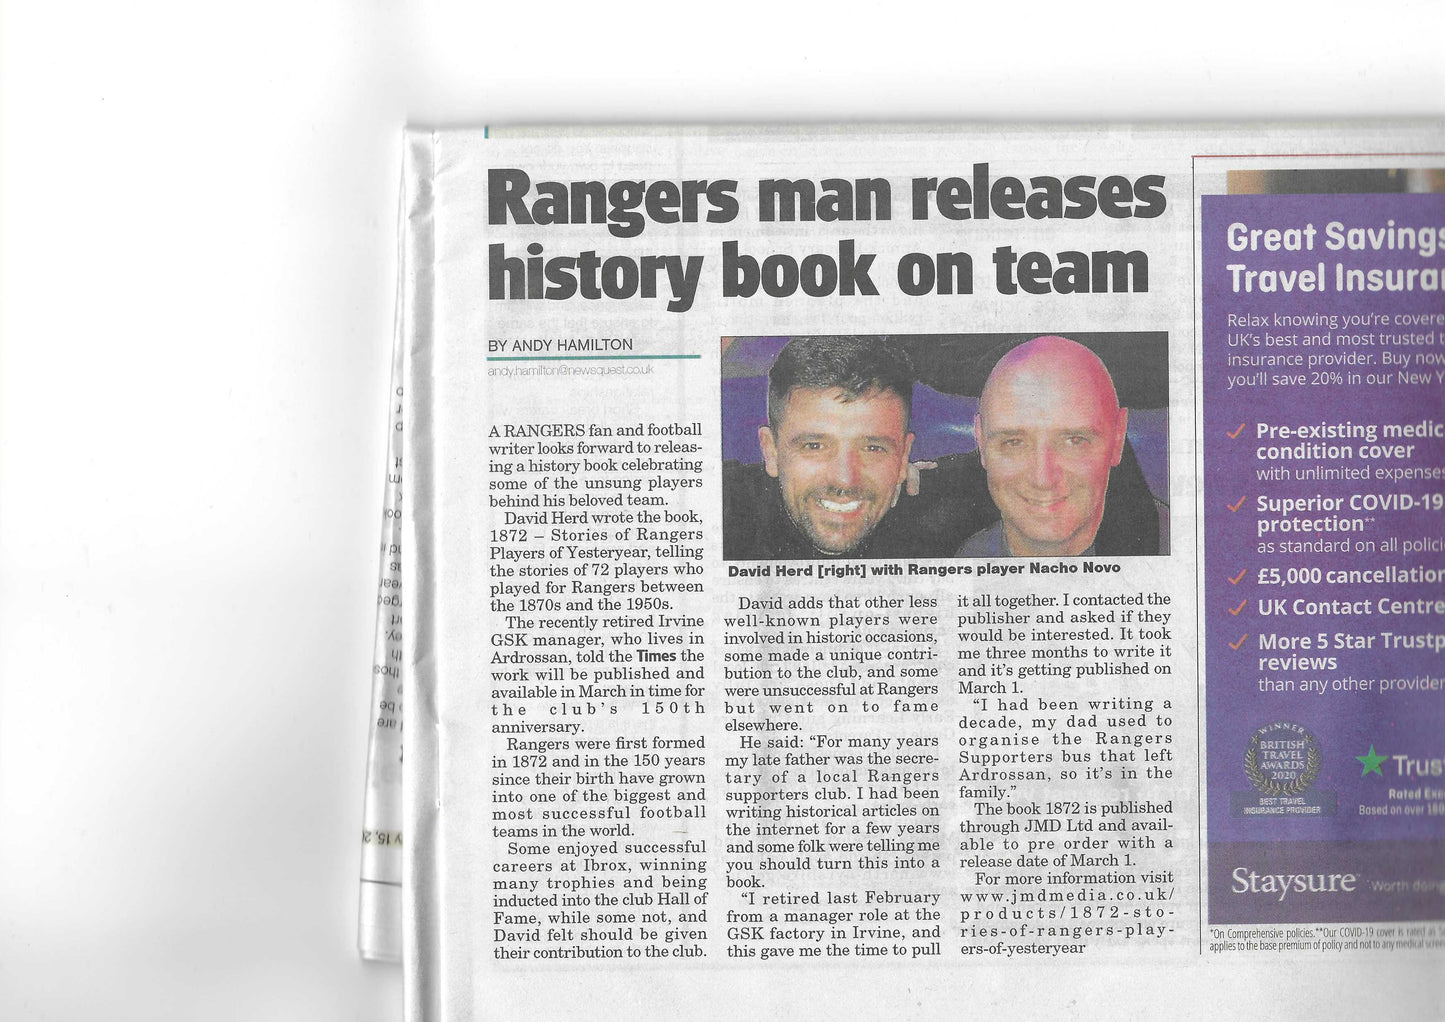 1872 – Stories of Rangers Players of Yesteryear